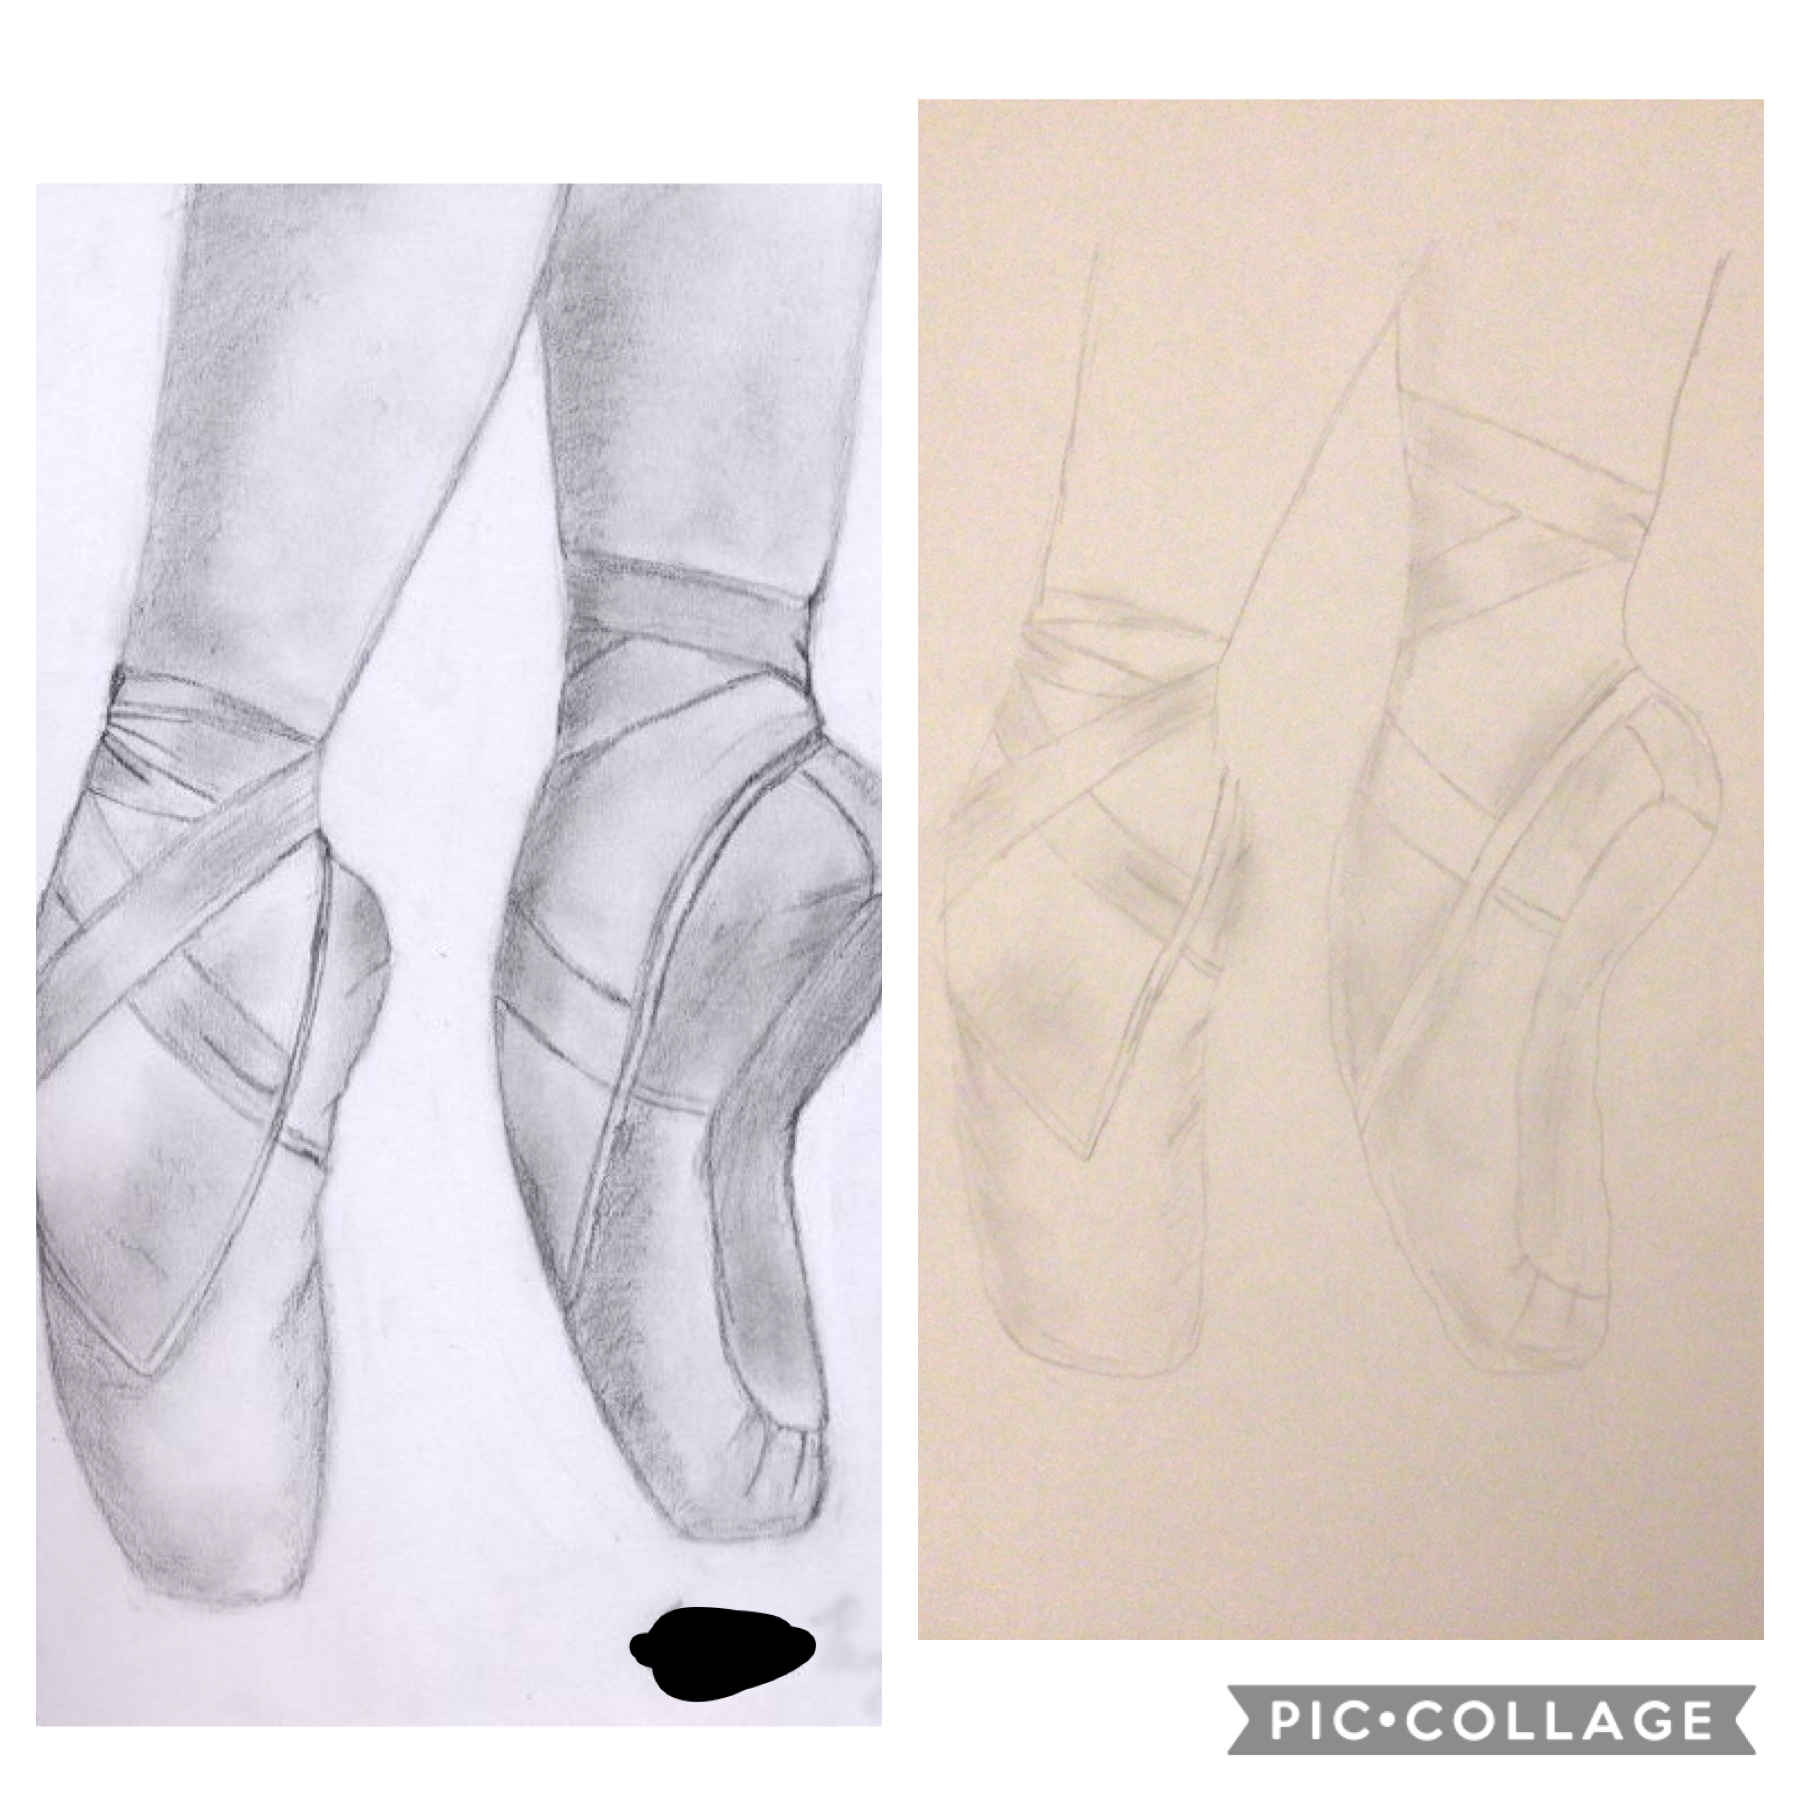 which ones do u like better? reveal of which ones i drew soon!